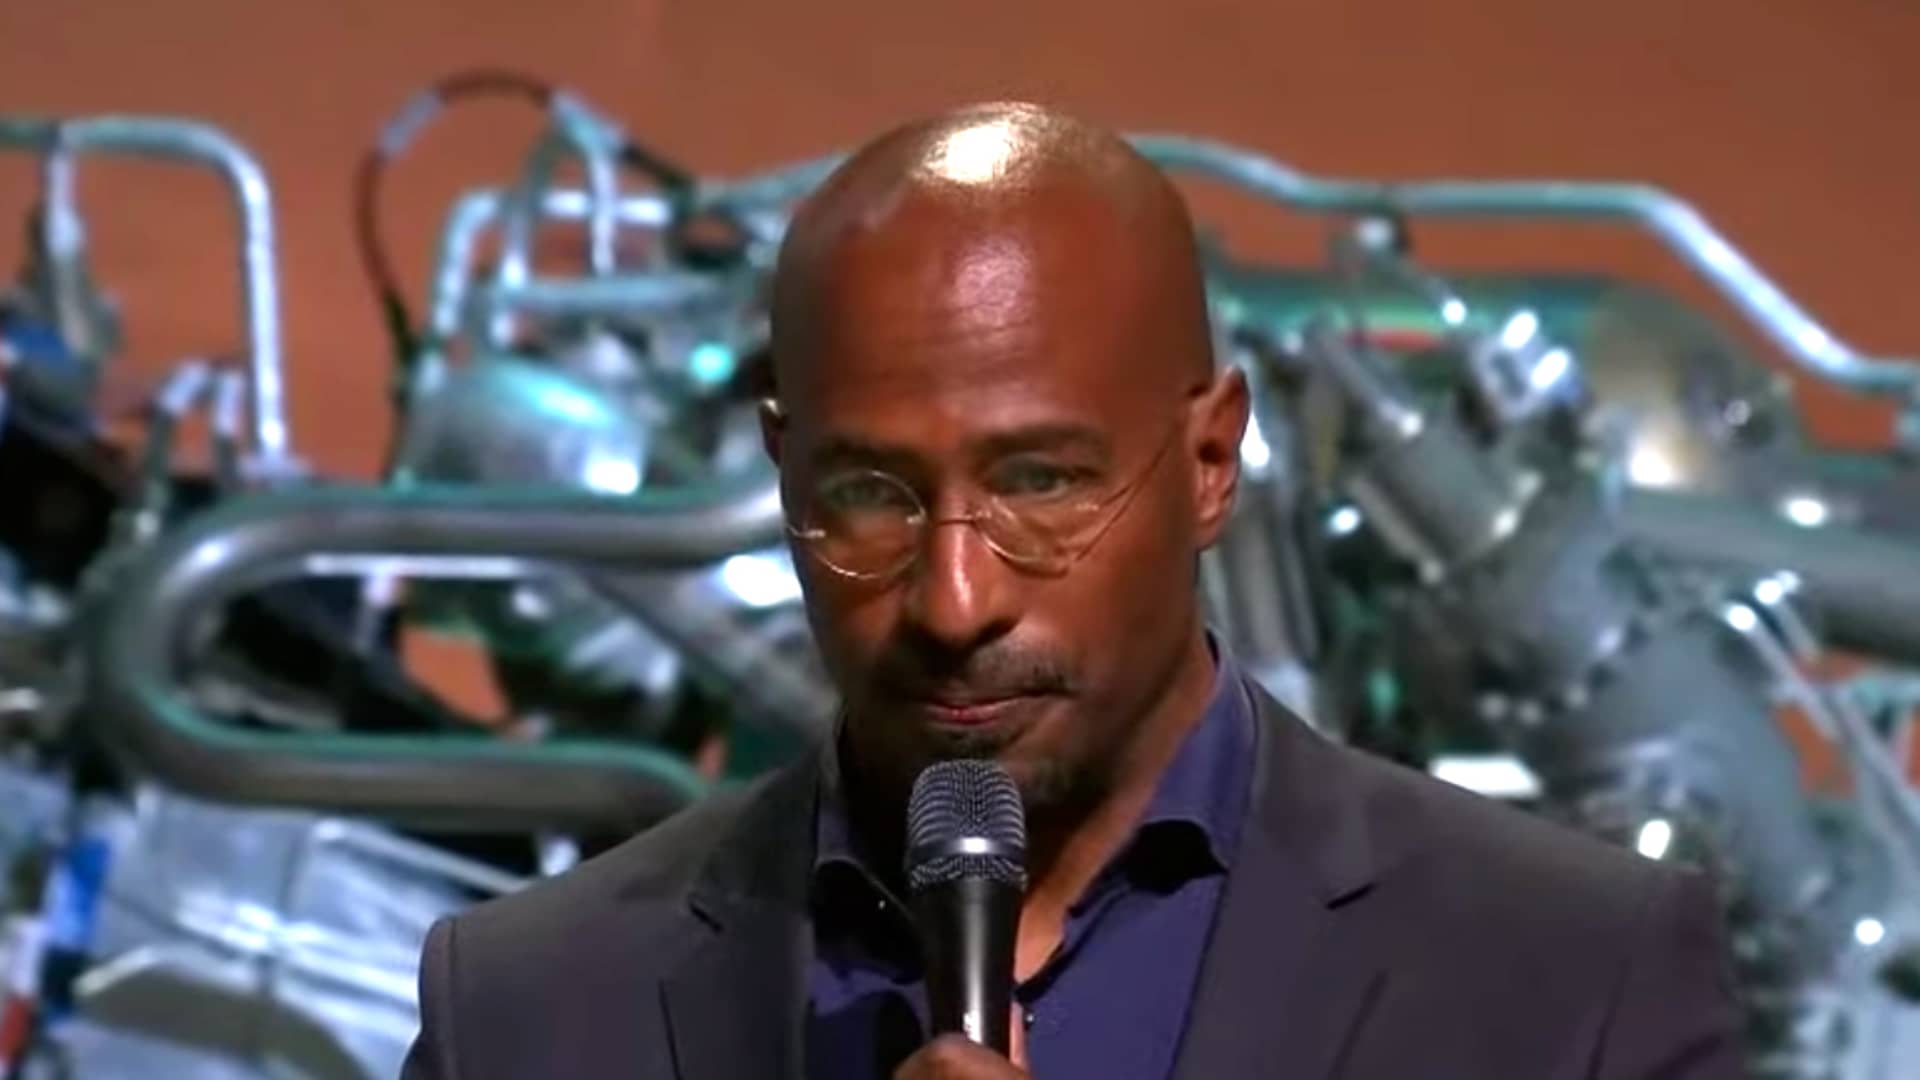 Van Jones awarded the first Courage and Civility Award by Jeff Bezos.